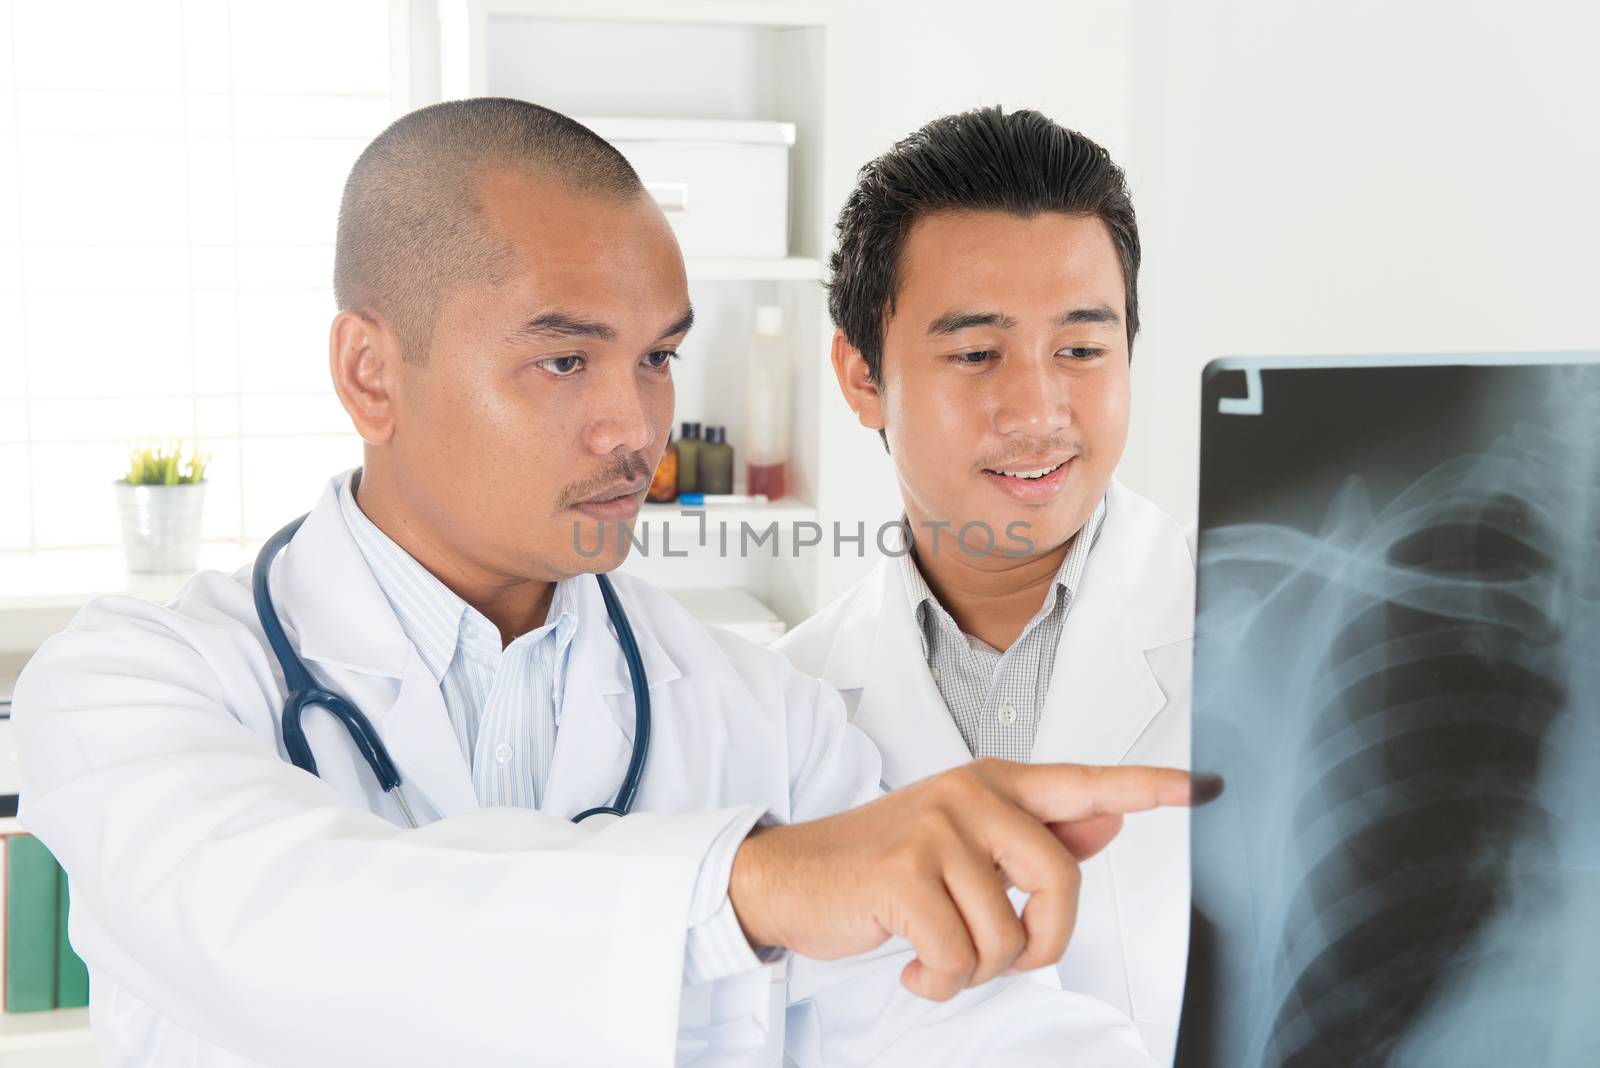 Doctors analyzing x-ray together in medical office. Southeast Asian Muslim people.